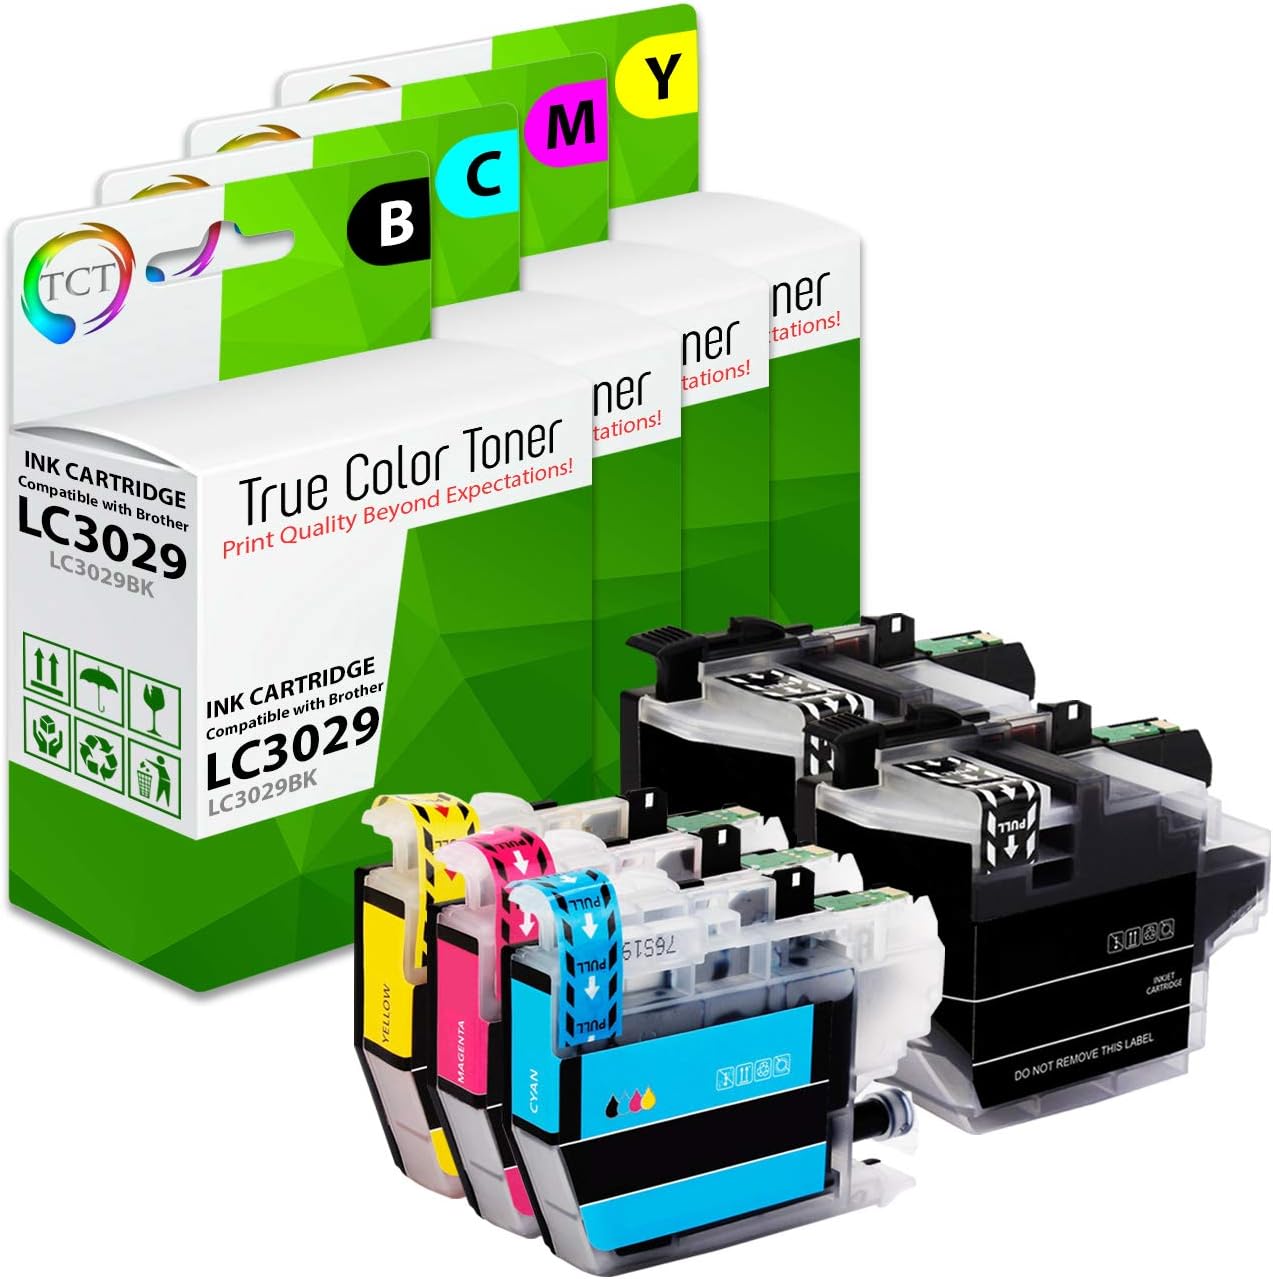 TCT Compatible Super HY Ink Cartridge Replacement for the Brother LC3029 Series - 10PK (B,C,M,Y)